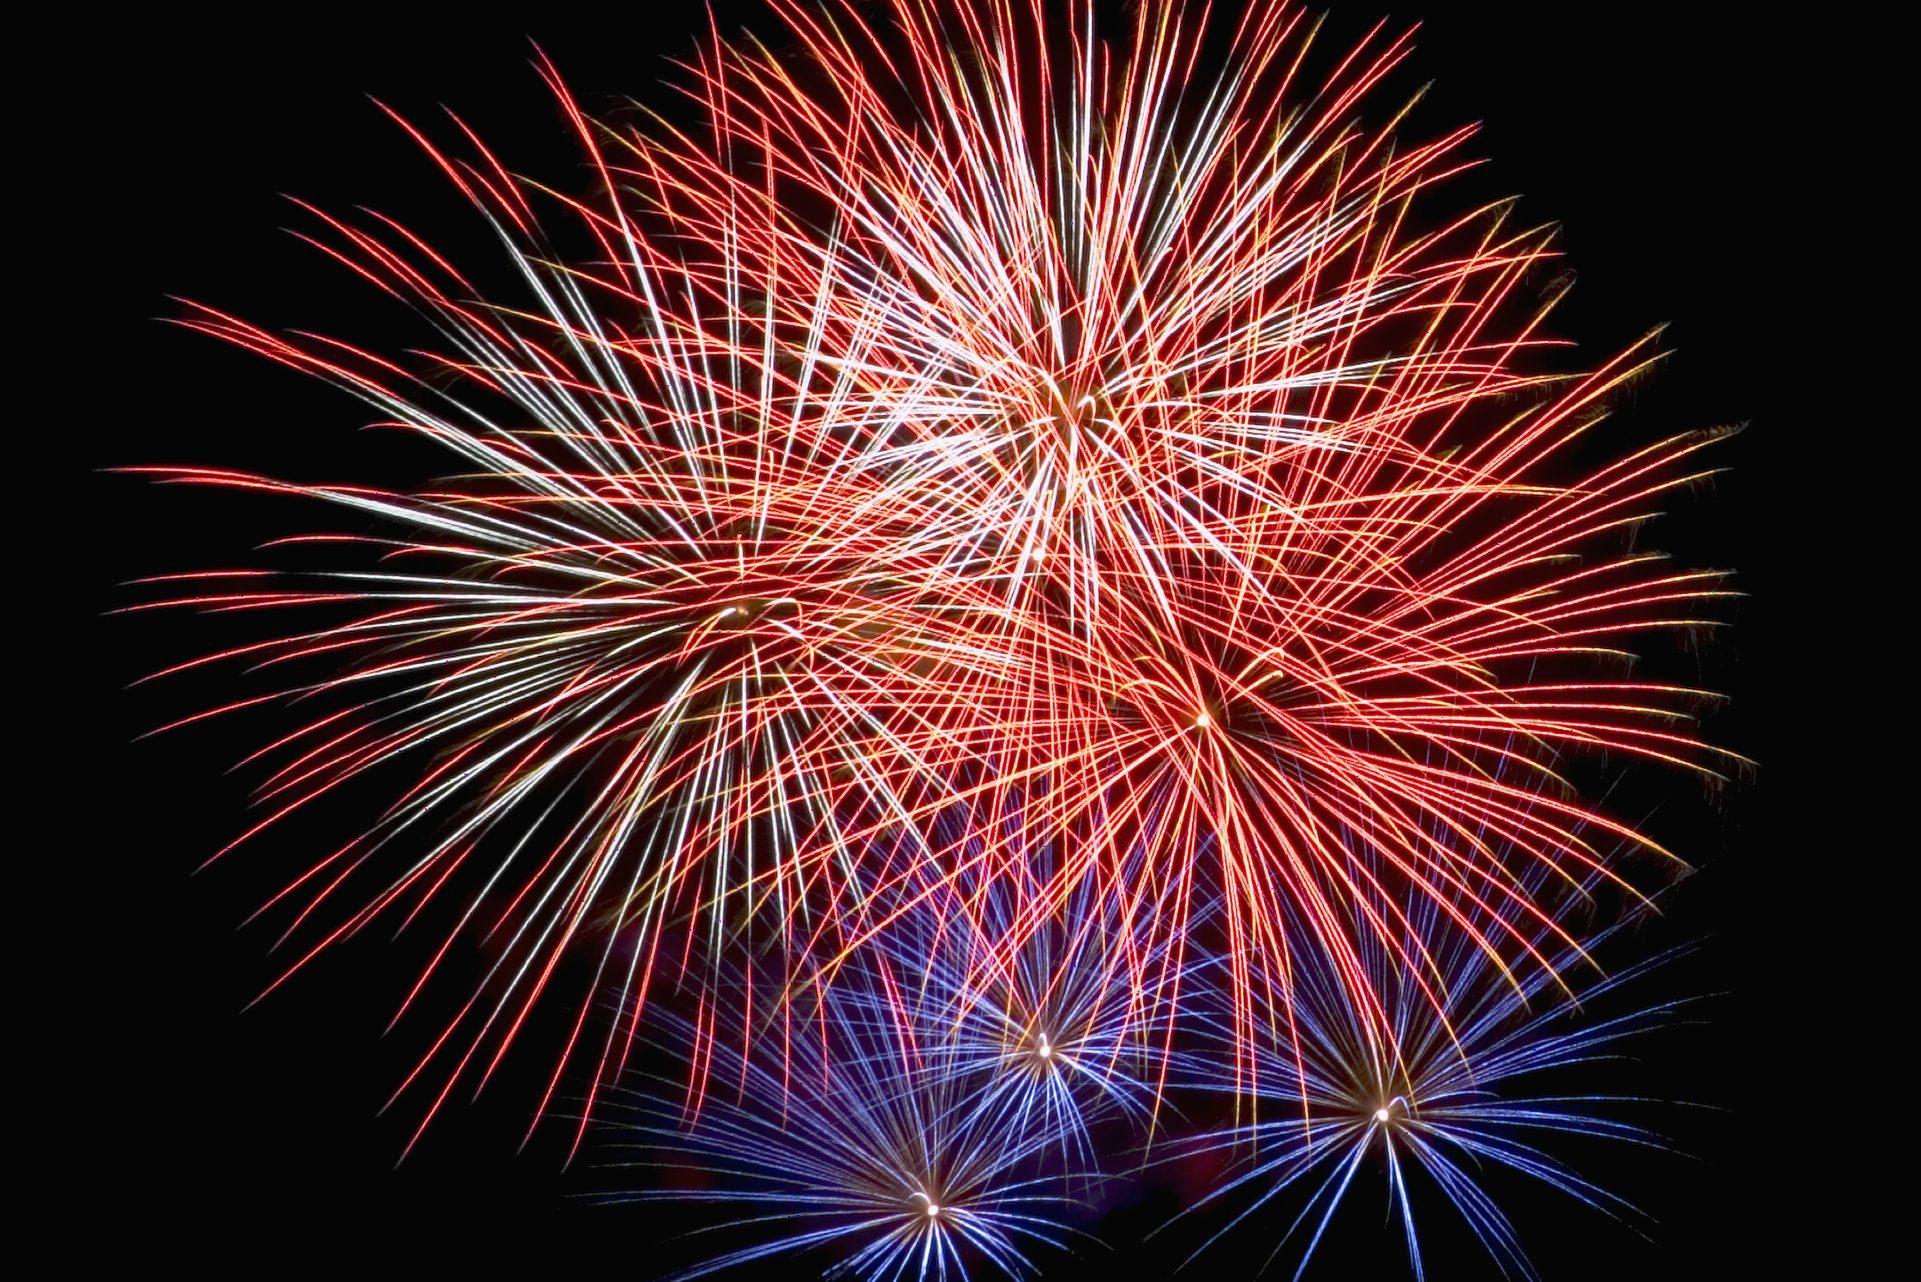 4th of July Events in OKC  Festivals, Live Music & Baseball